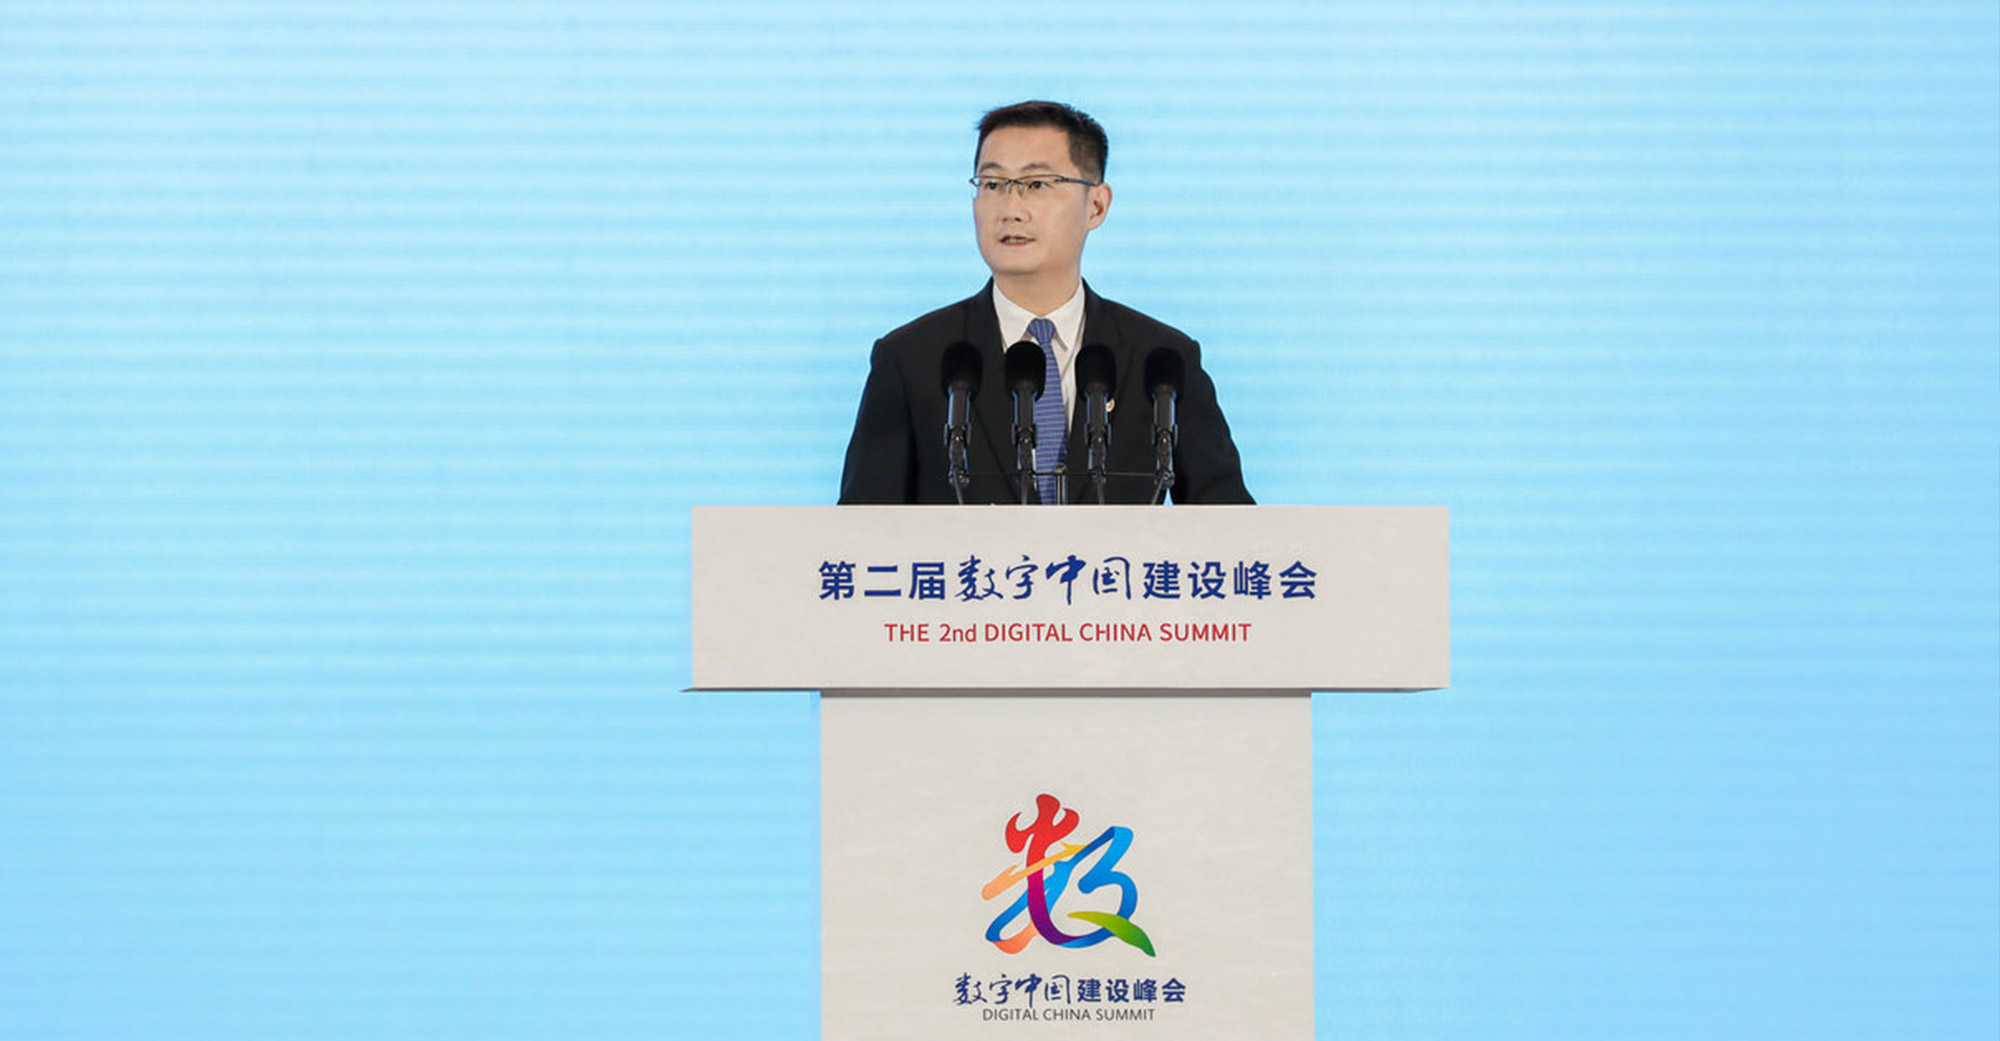 Tencent’s Pony Ma Declares Company’s New Mission And Vision Statement — Tech For Social Good